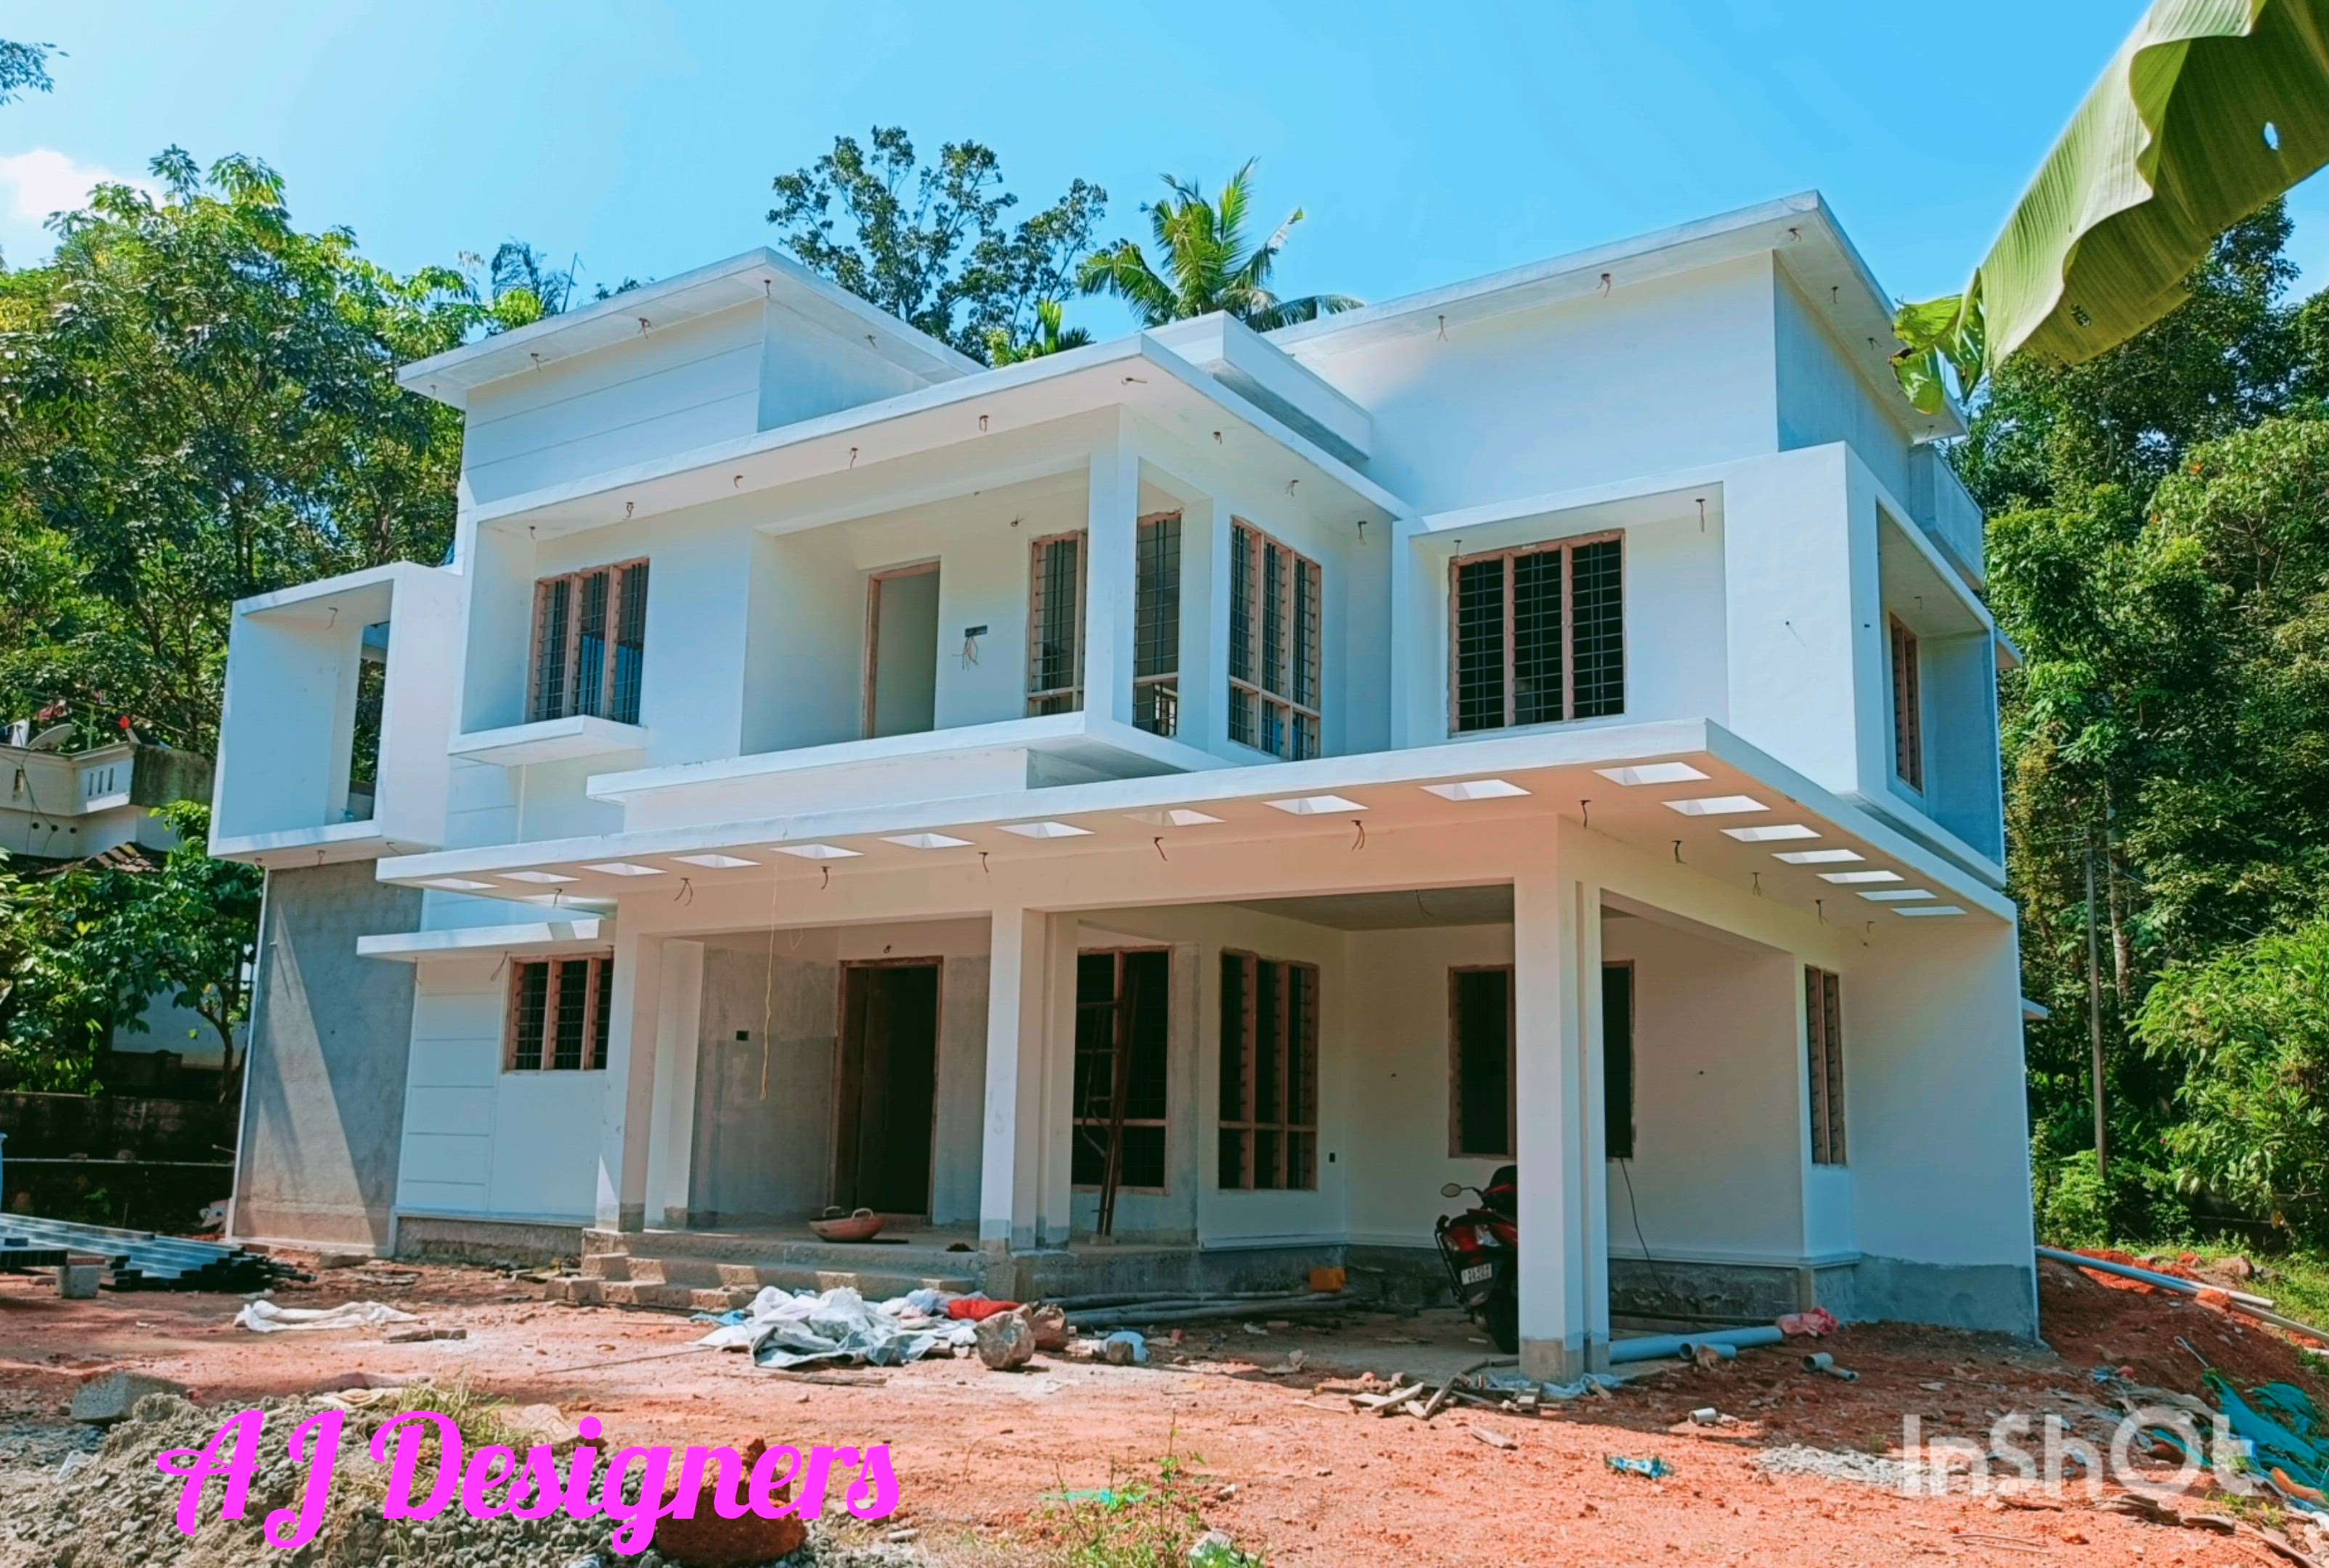 Our Ongoing Residence building @ 2450 Sqft # Kottayam